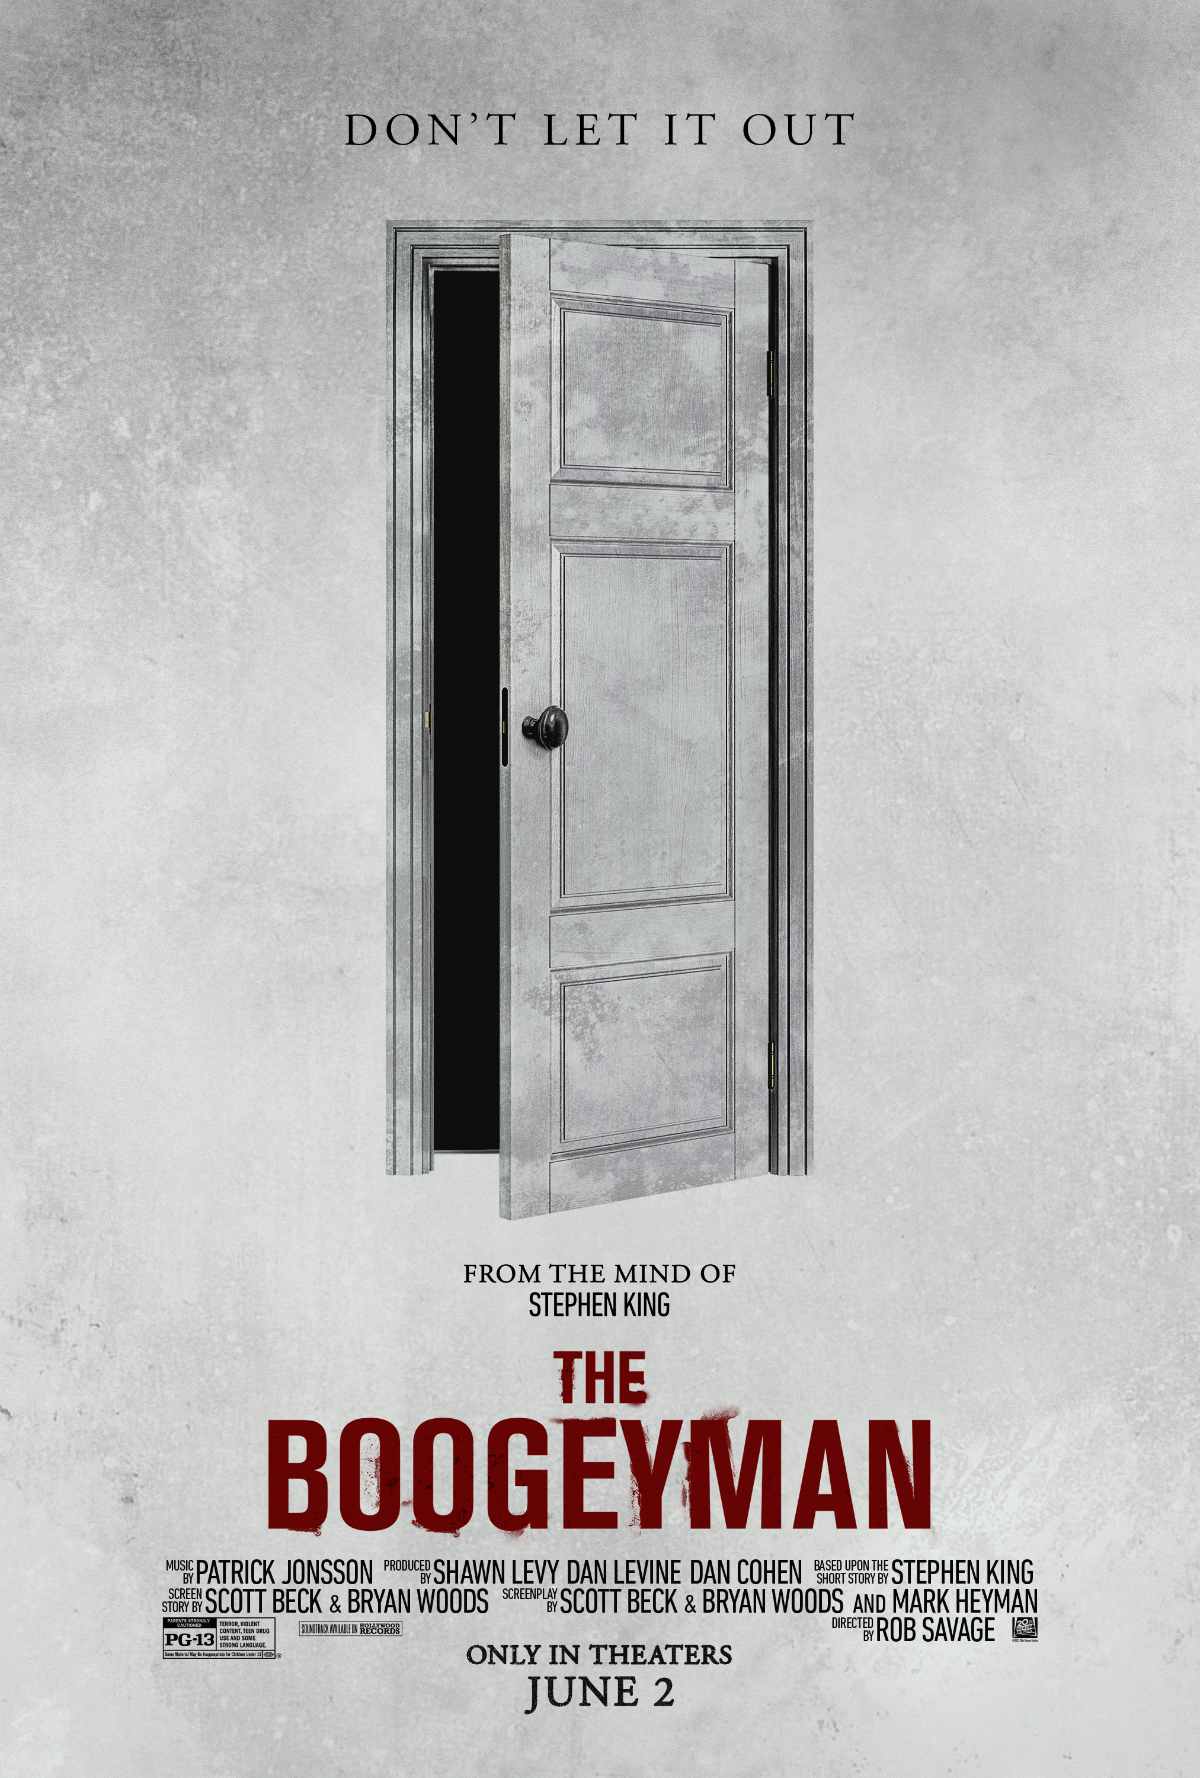 The Boogeyman Trailer and Poster Debut